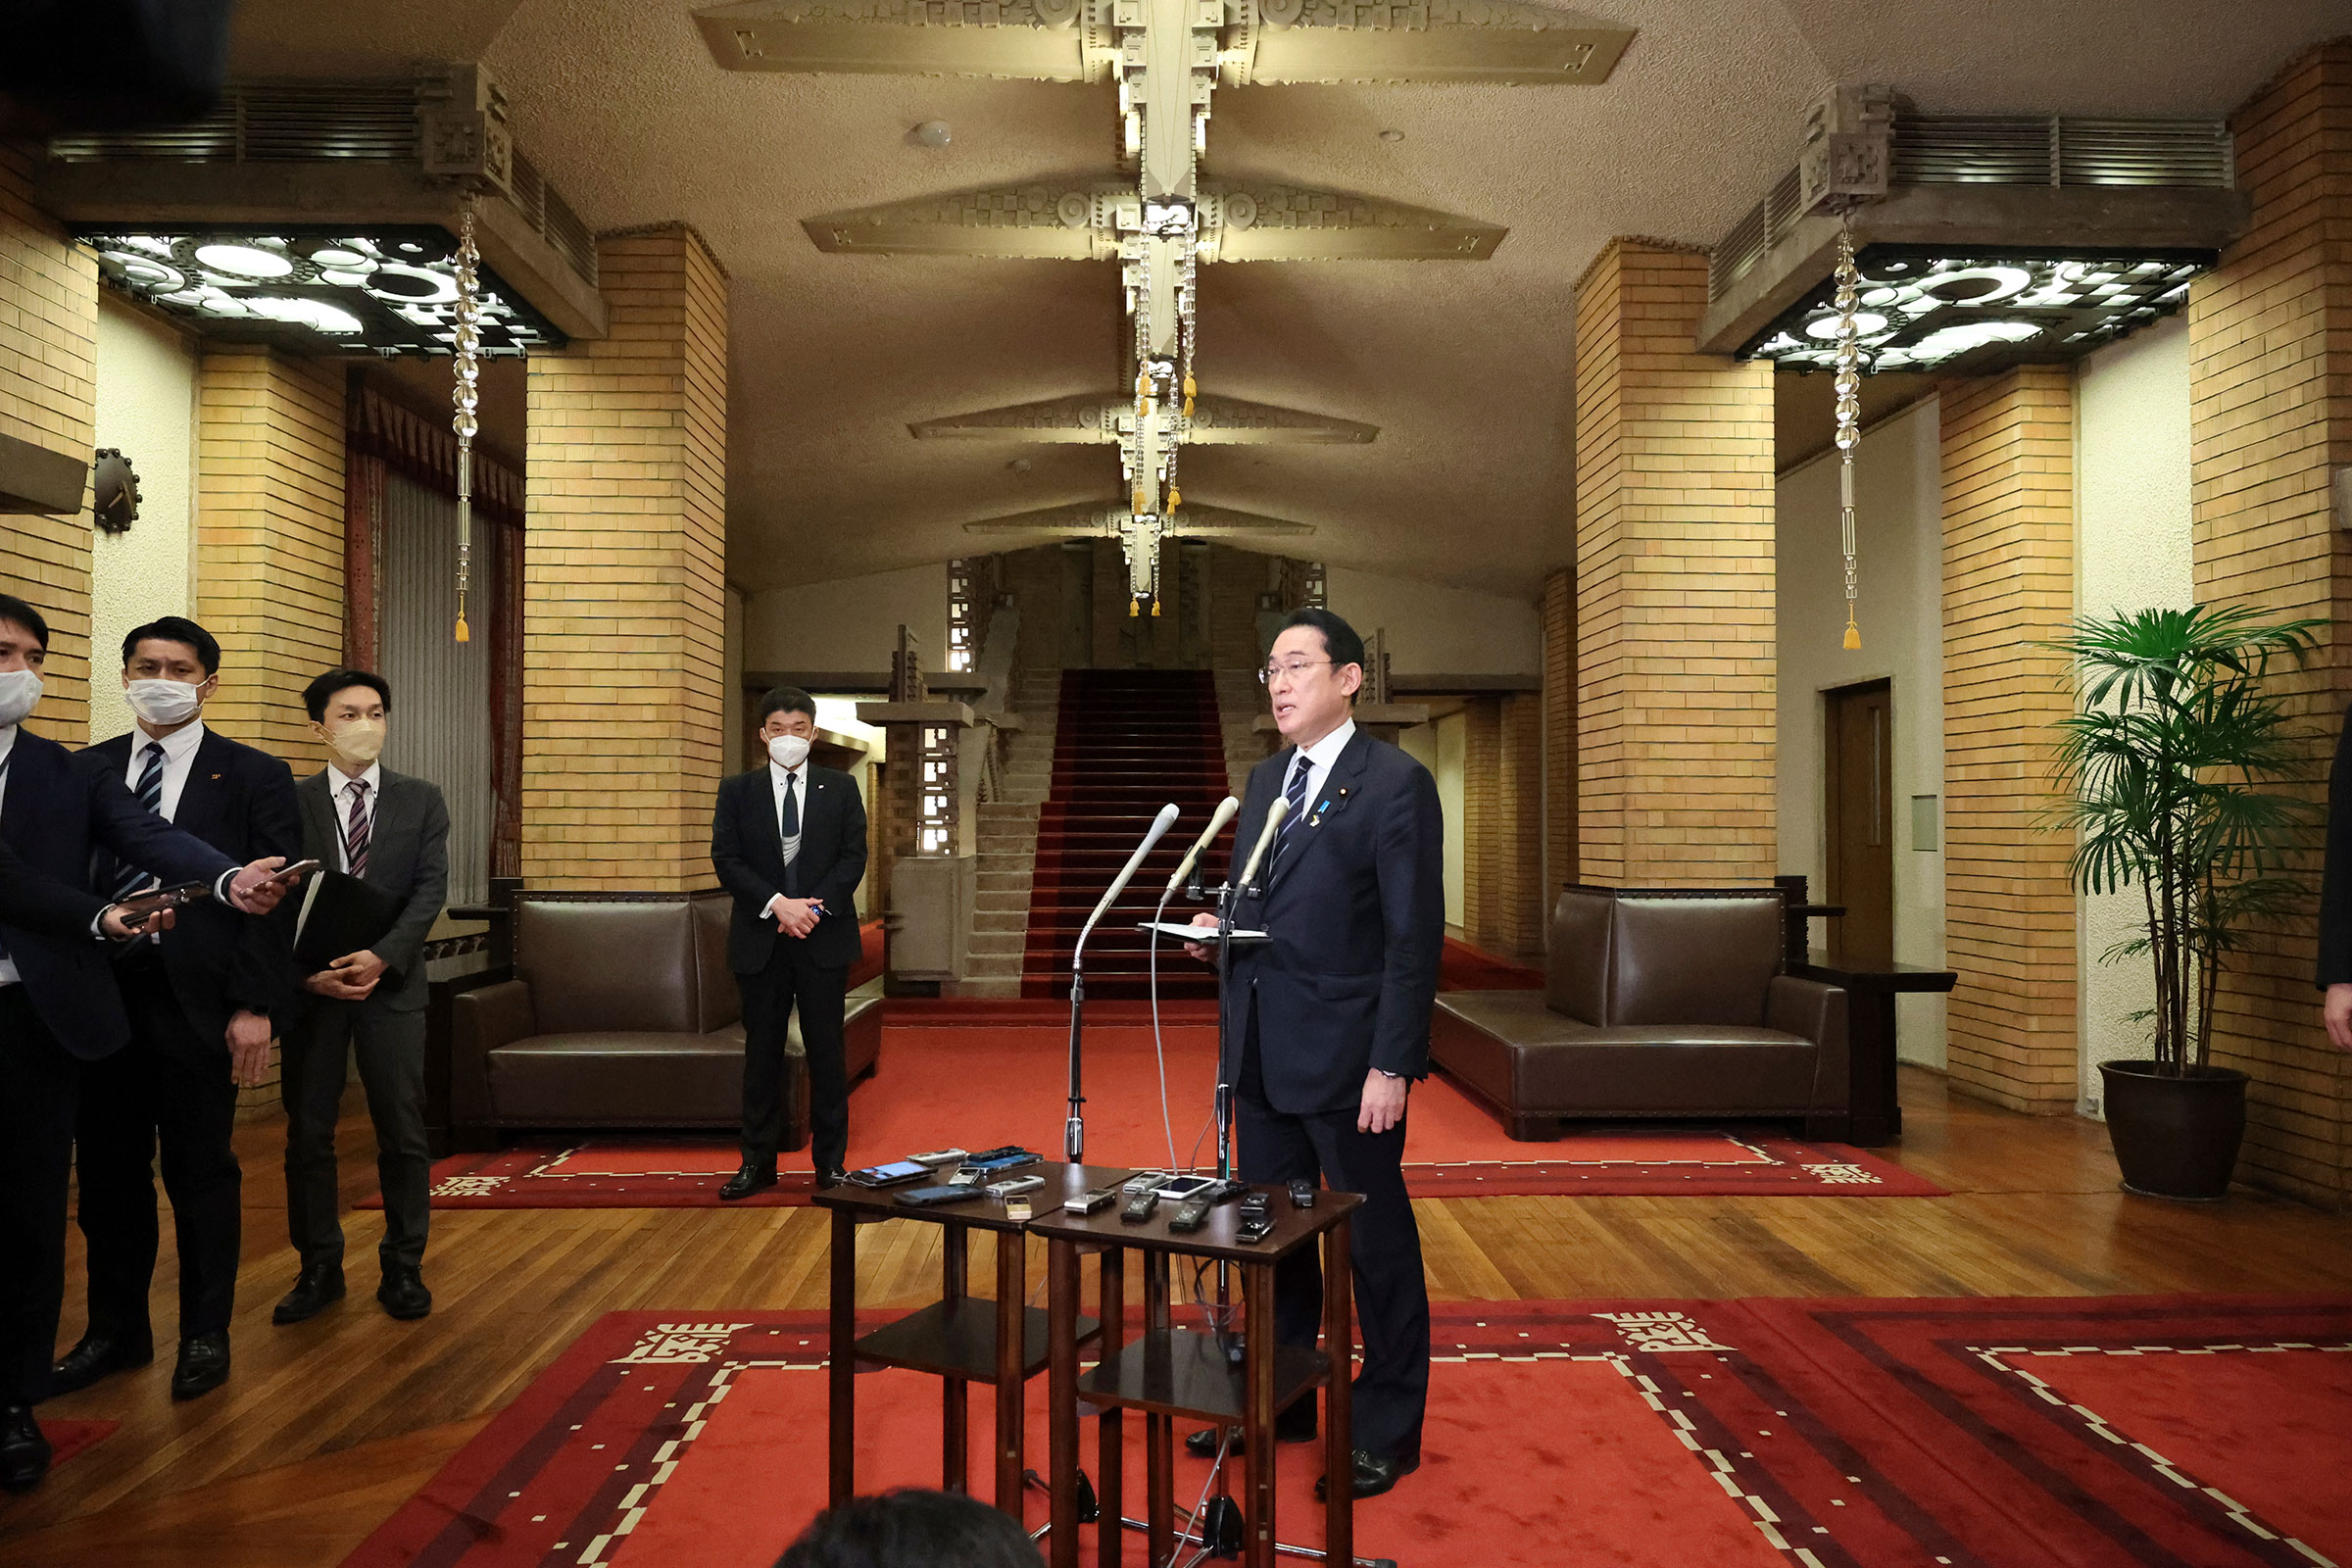 Japanese Prime Minister Fumio Kishida speaks to reporters before leaving for Brussel to attend the G7 Emergency Summit at the prime minister's residence in Tokyo on March 23, 2022. G7 nations will discuss Ukraine crisis and Japan will unveil a new sanction against Russia at the summit meeting. (The Yomiuri Shimbun/AP)